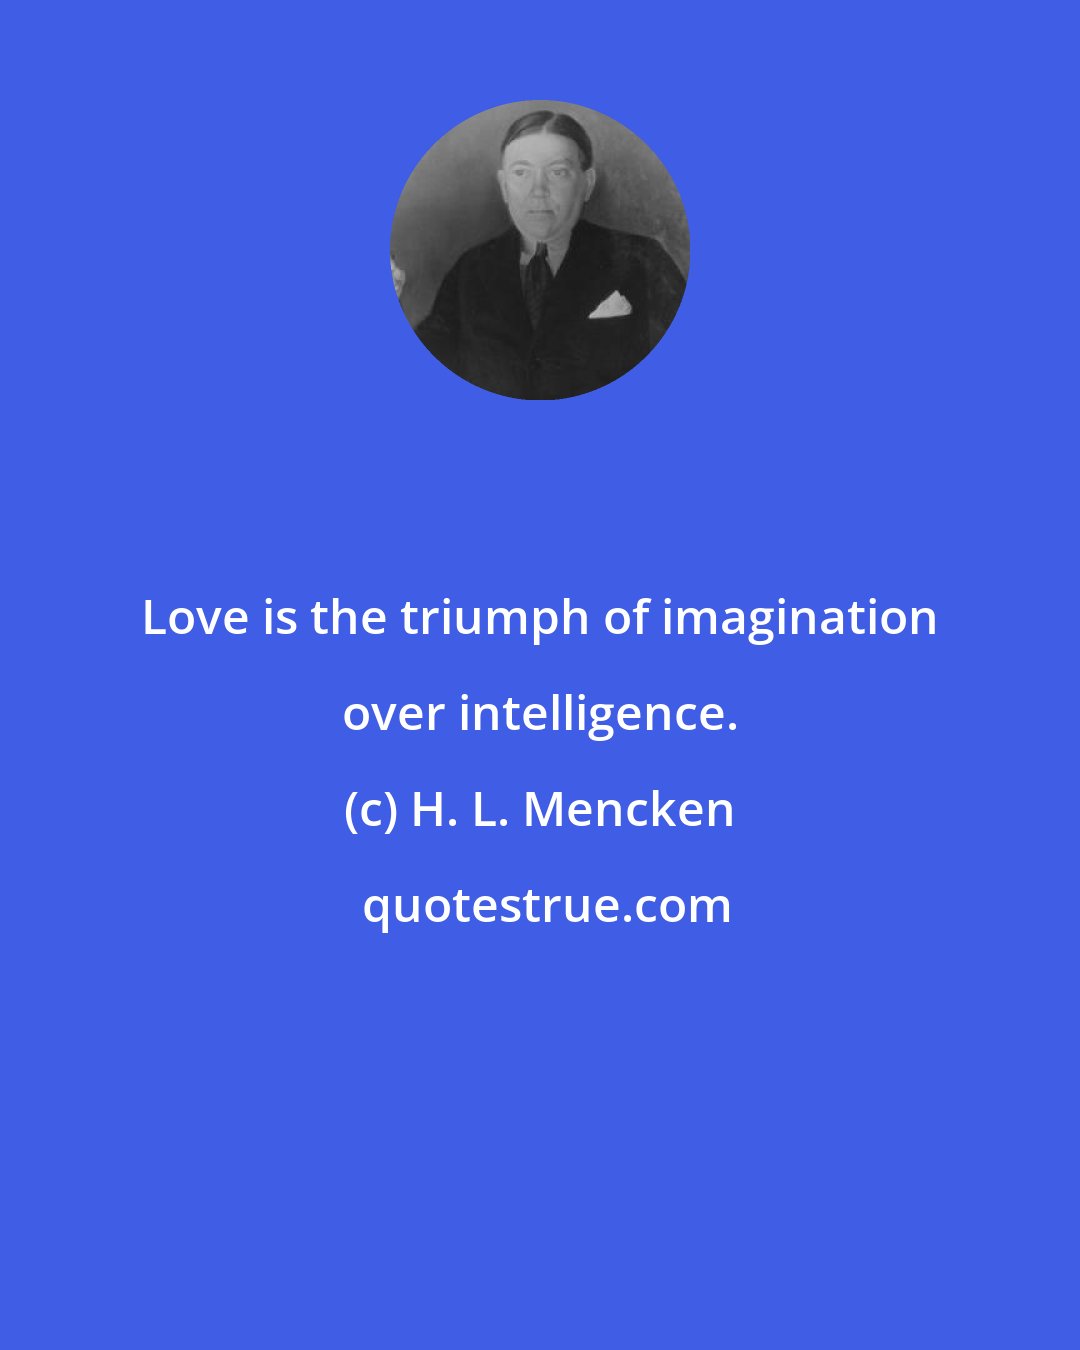 H. L. Mencken: Love is the triumph of imagination over intelligence.